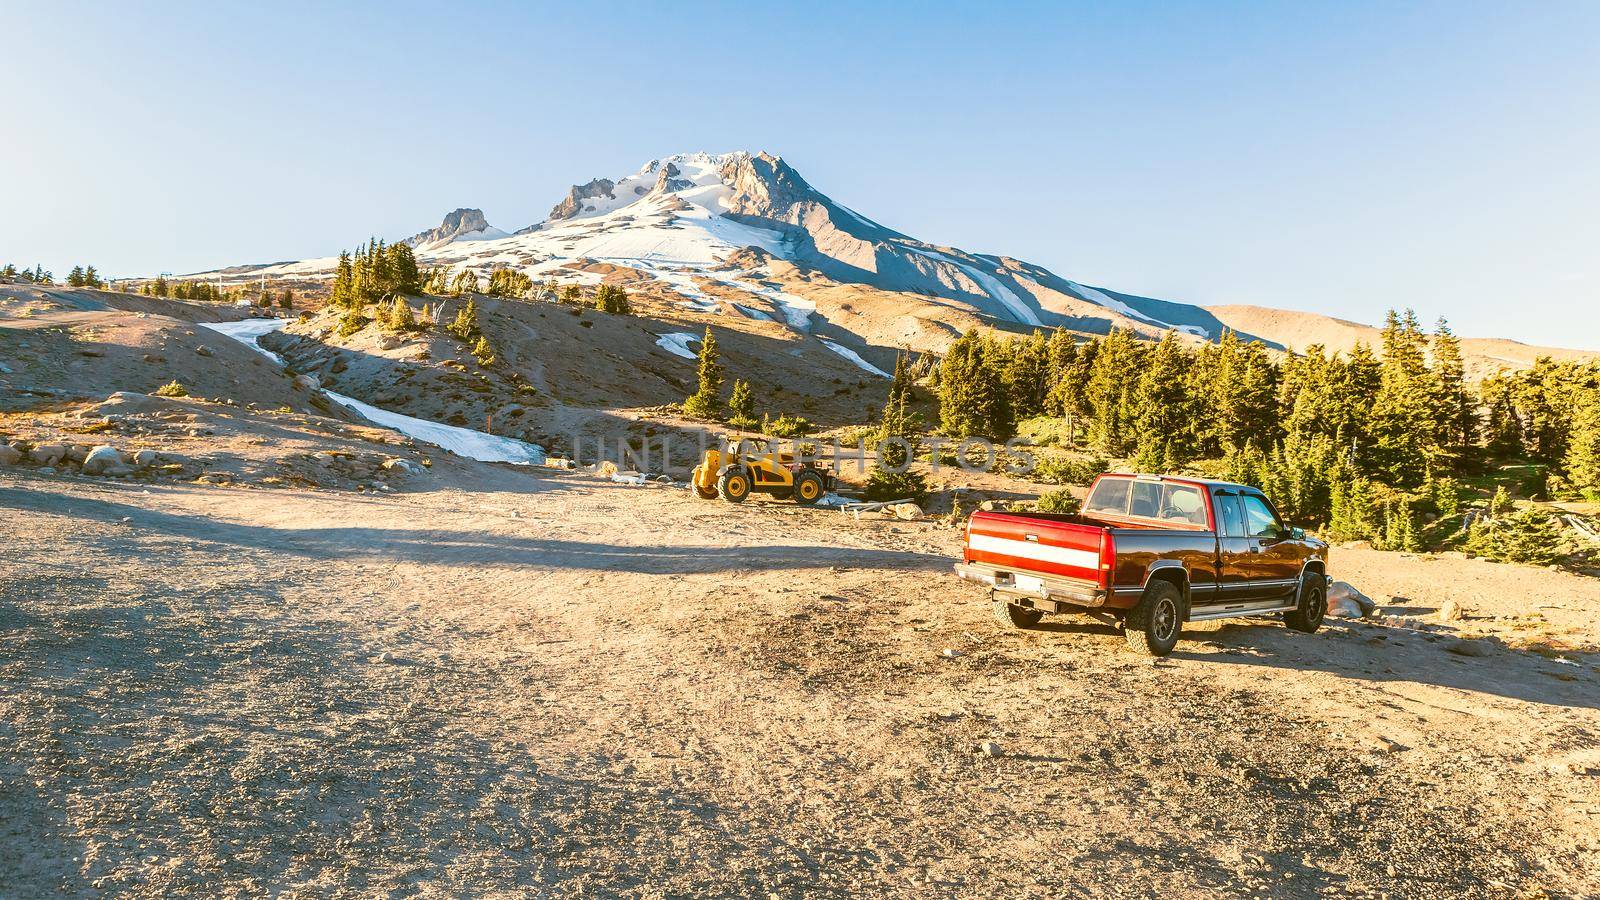 The Top of Mt. Hood, Oregon, and a red pickup truck on the foreground